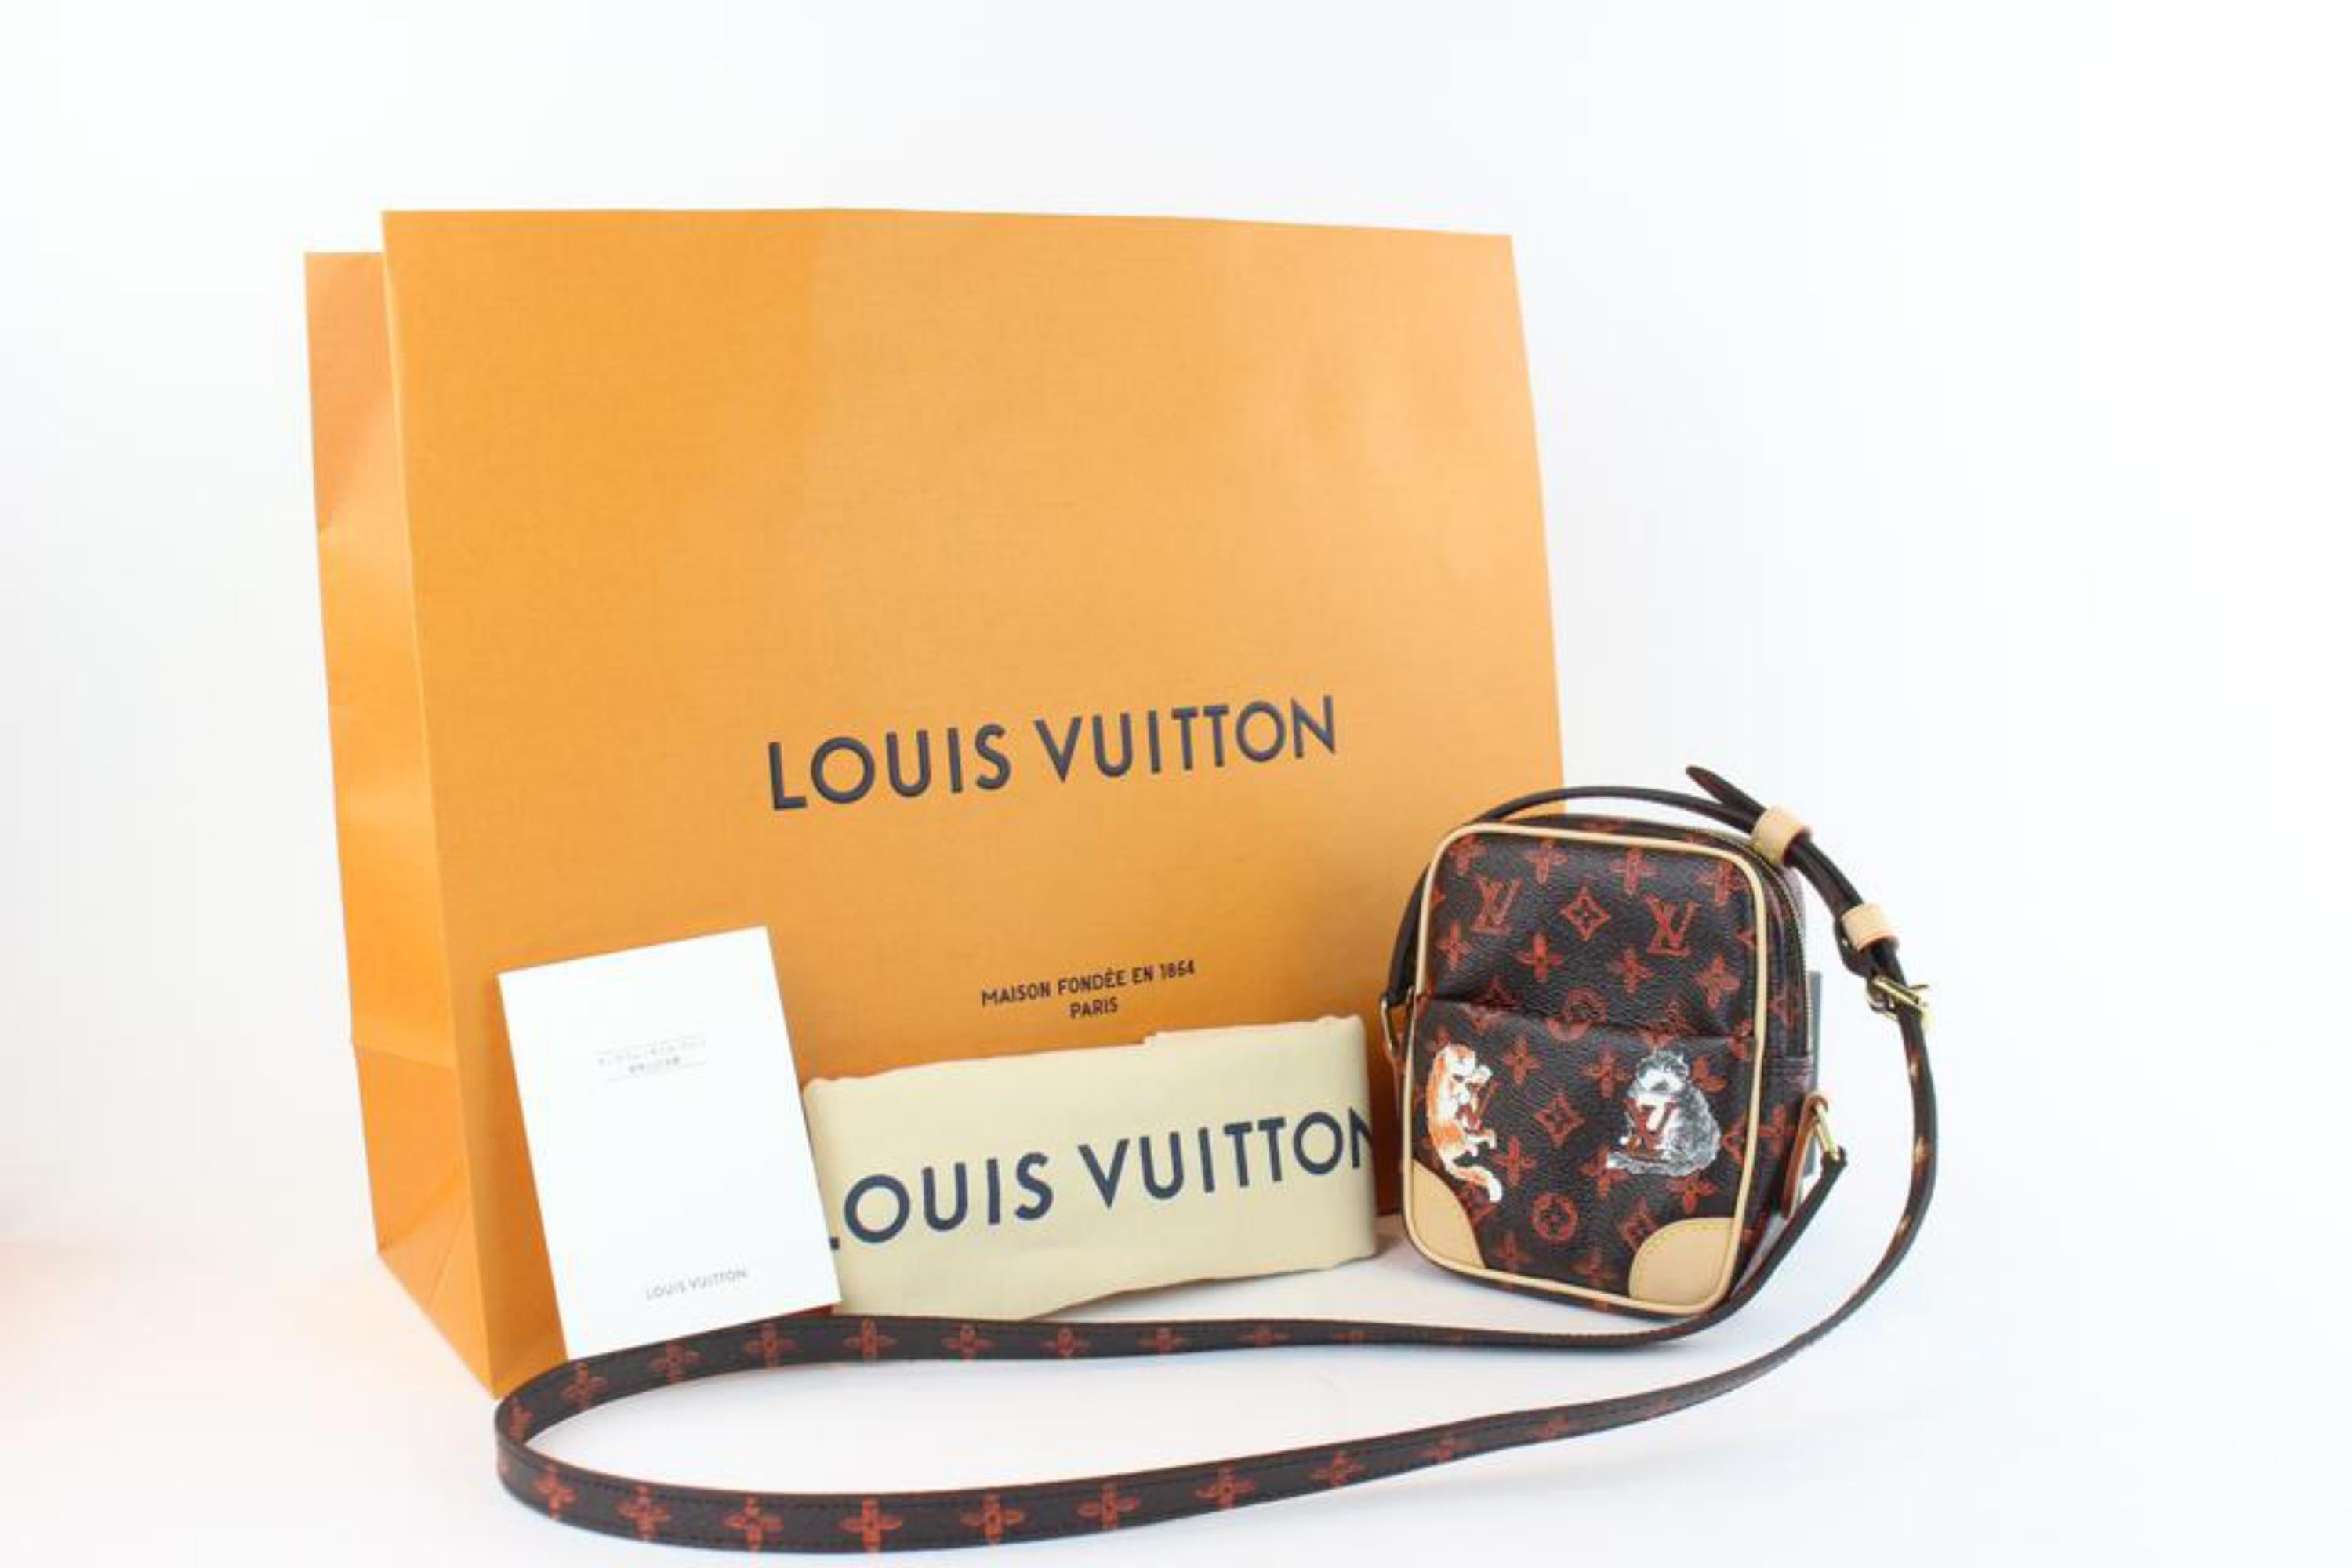 Louis Vuitton Mini  from 1992 & Danube 2010 #amorevintage